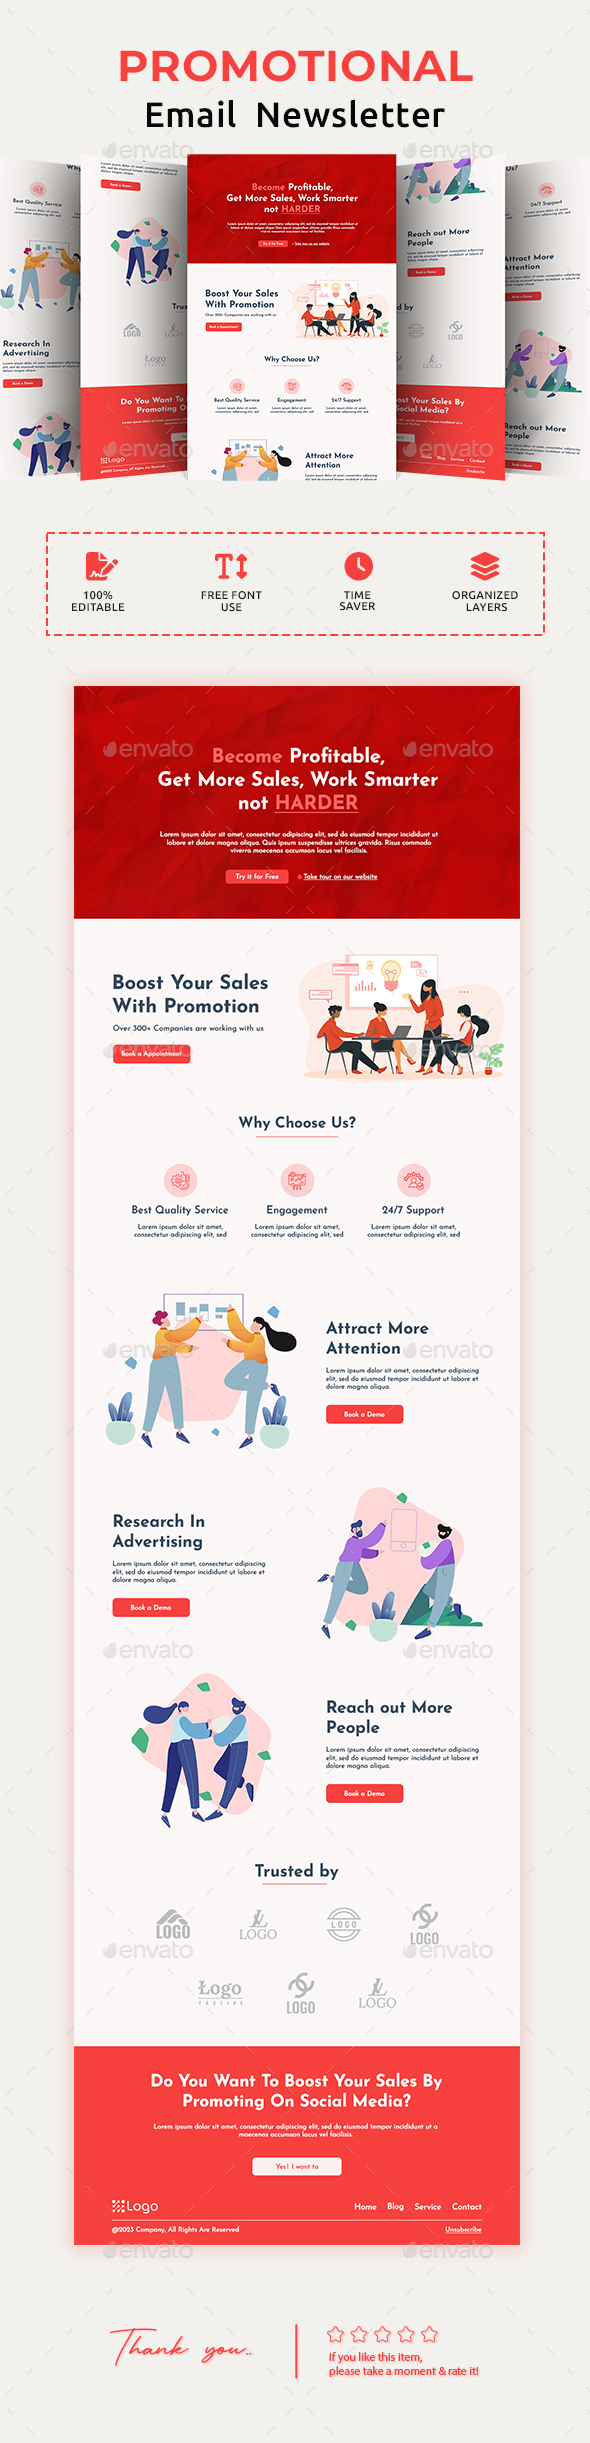 Marketing Agencies Email Newsletter PSD Template